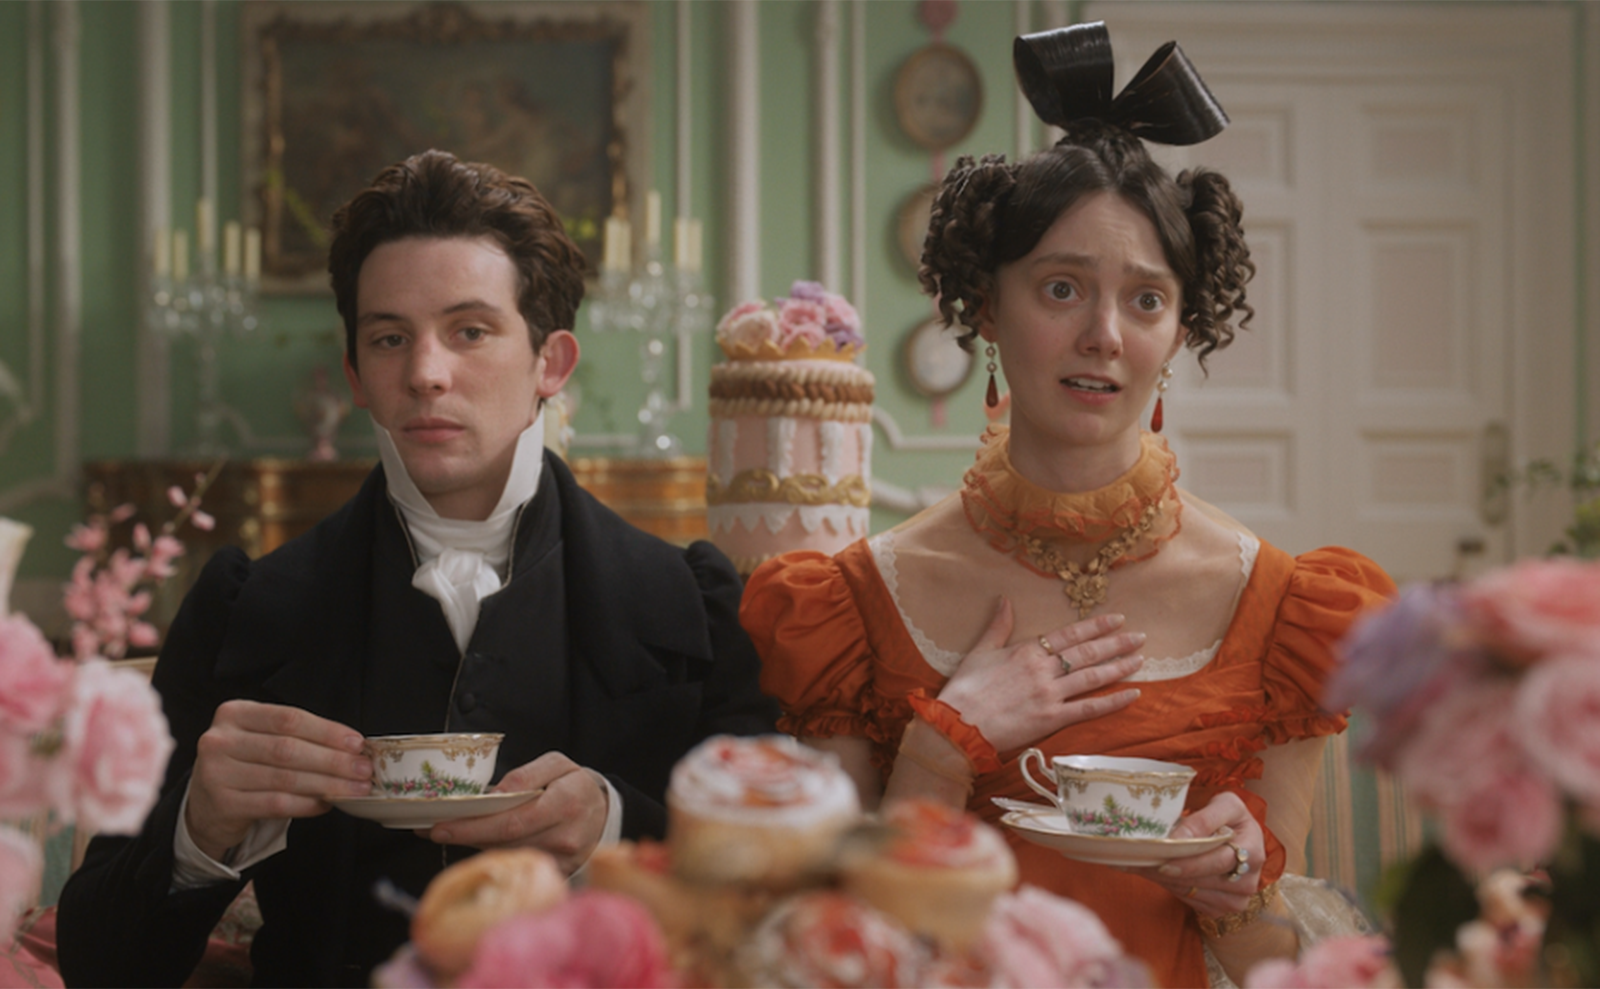 a young man and woman in regency costumes drinking tea with plates of cakes in the foreground